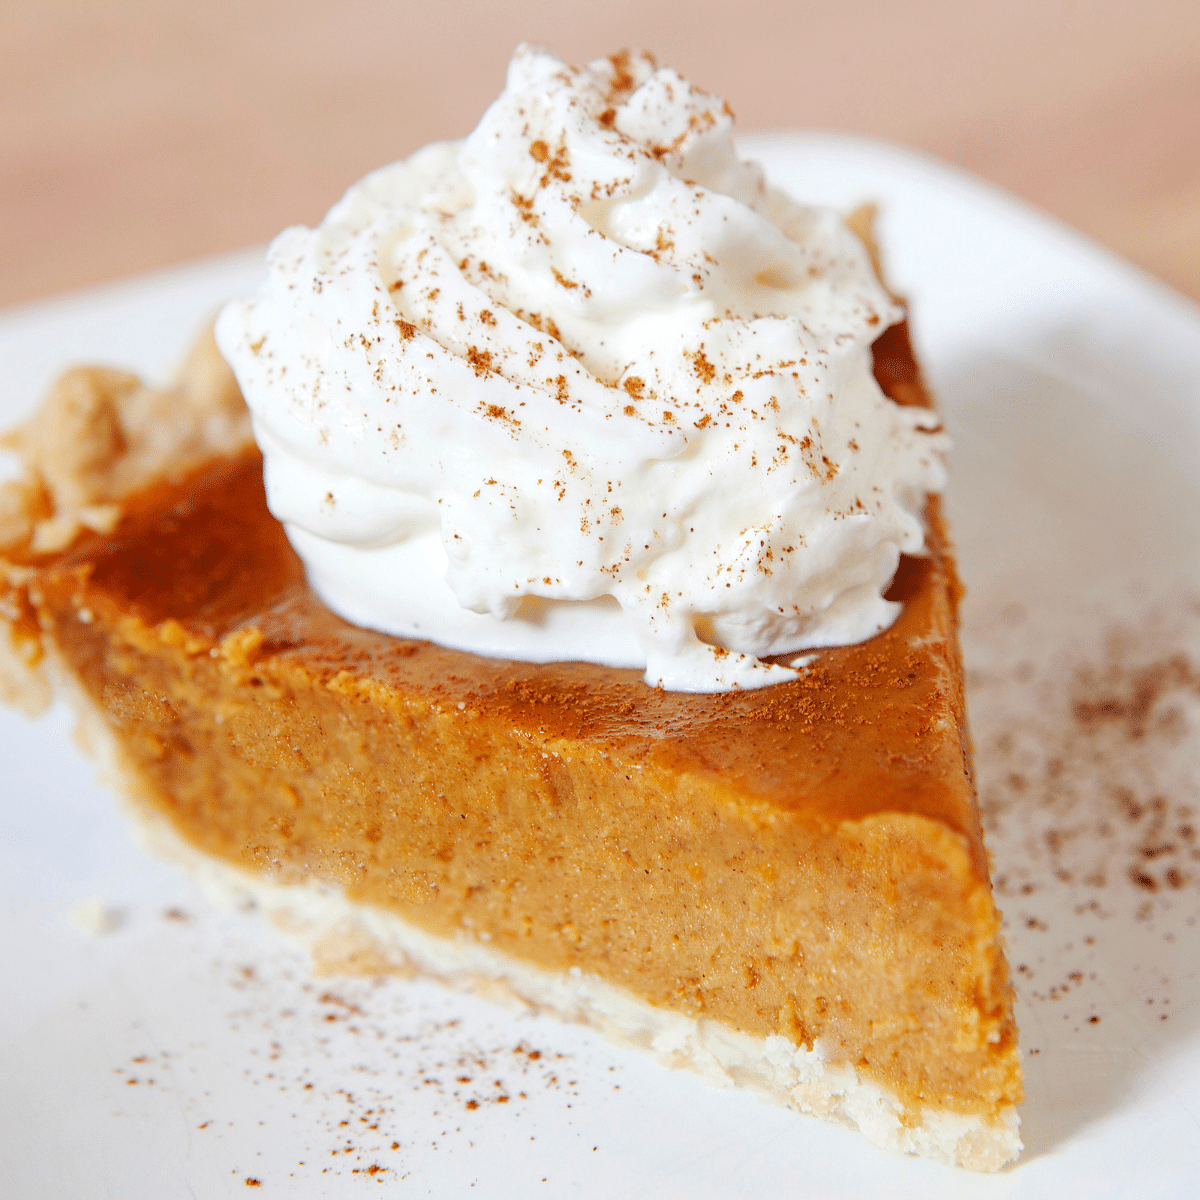 One piece of pumpkin pie with whipped cream on a white plate.